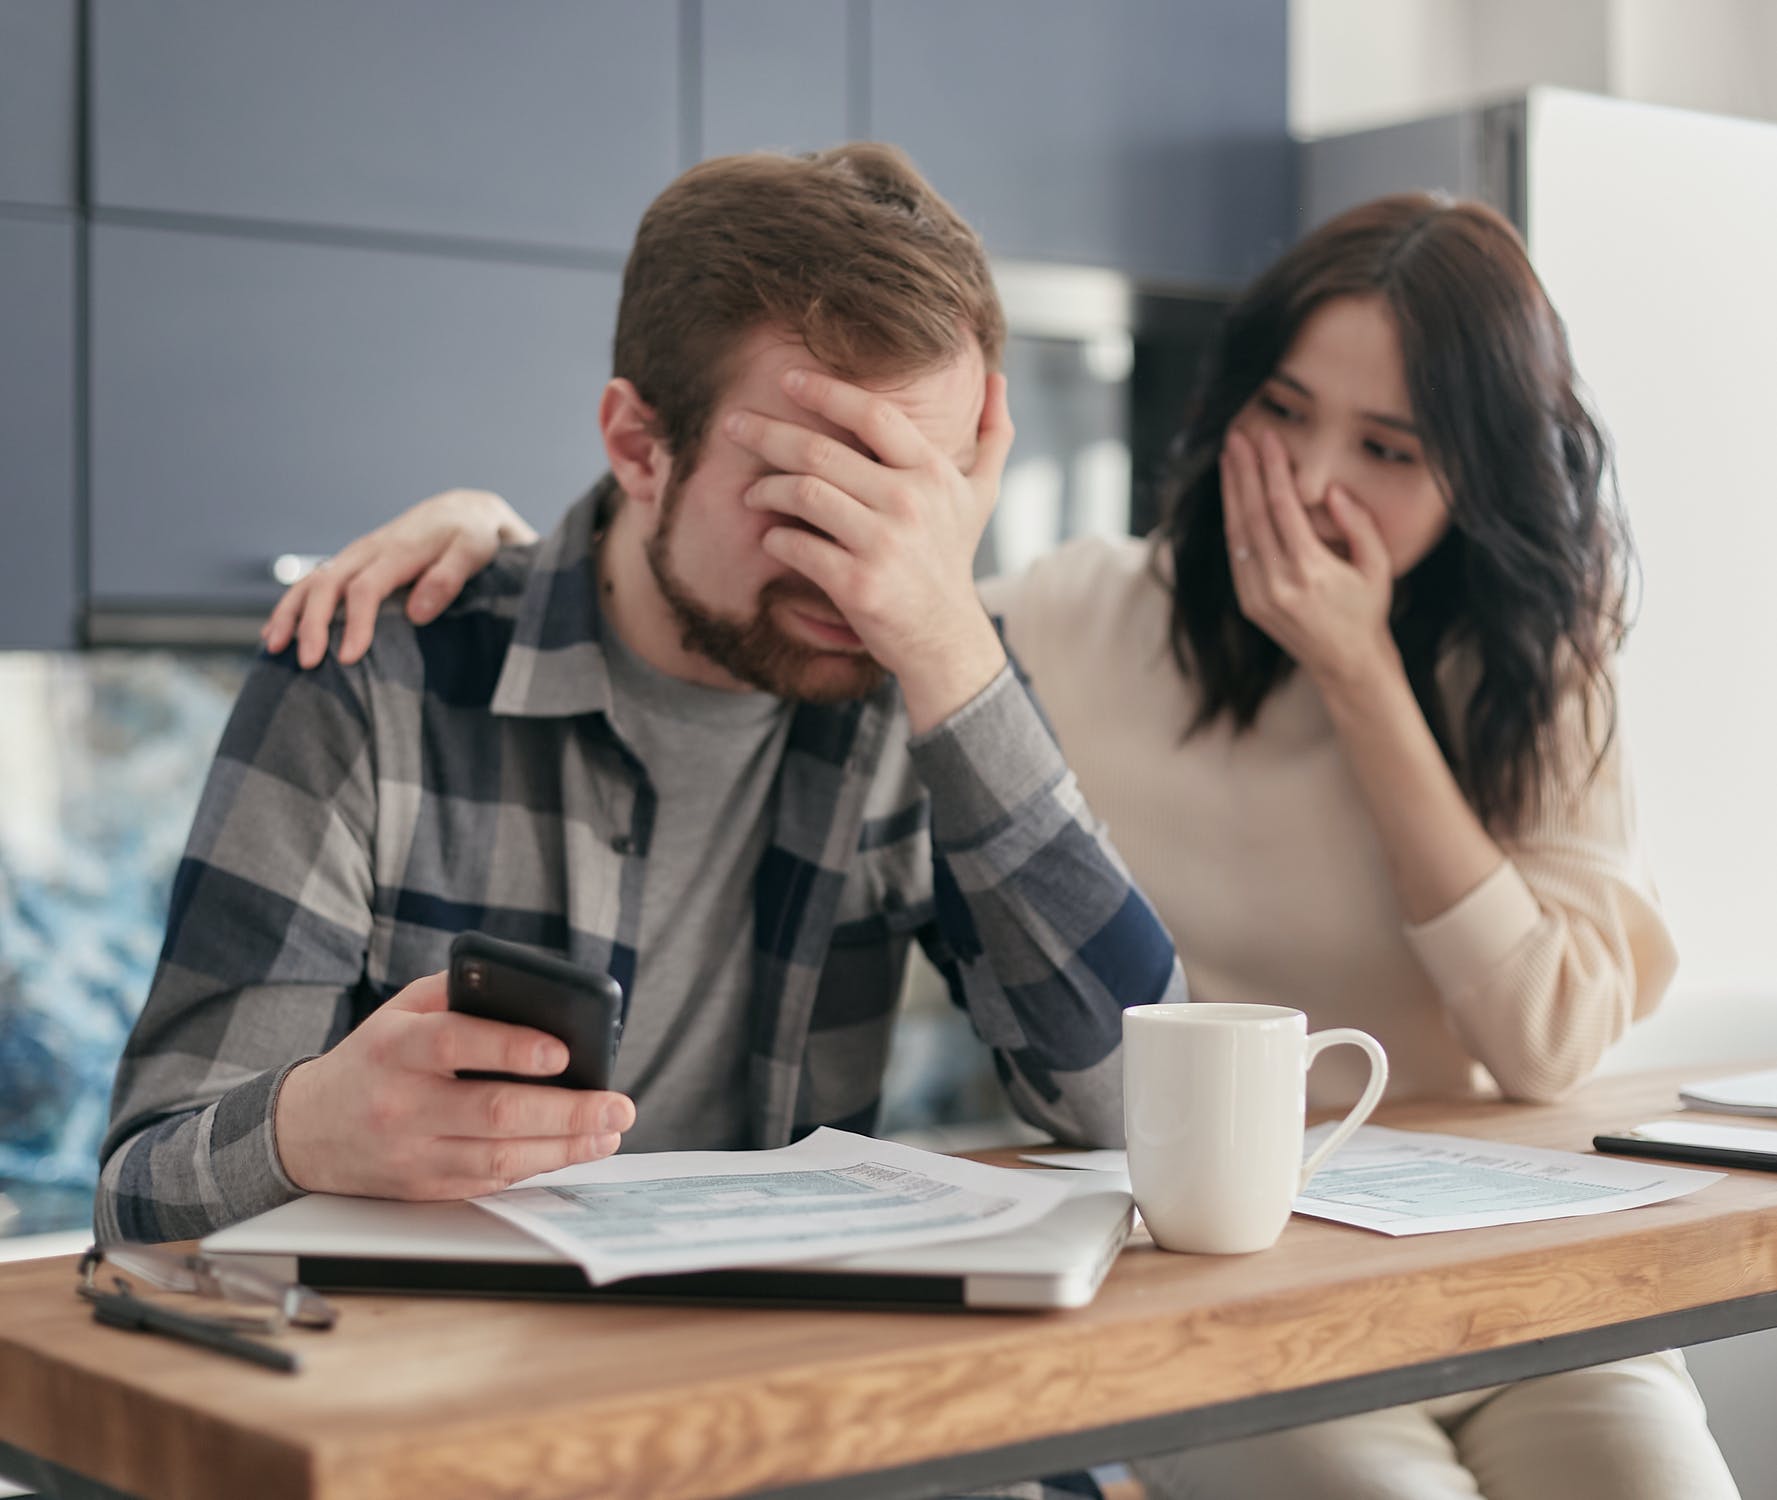 12 Common Reasons Why People Get Into Debt